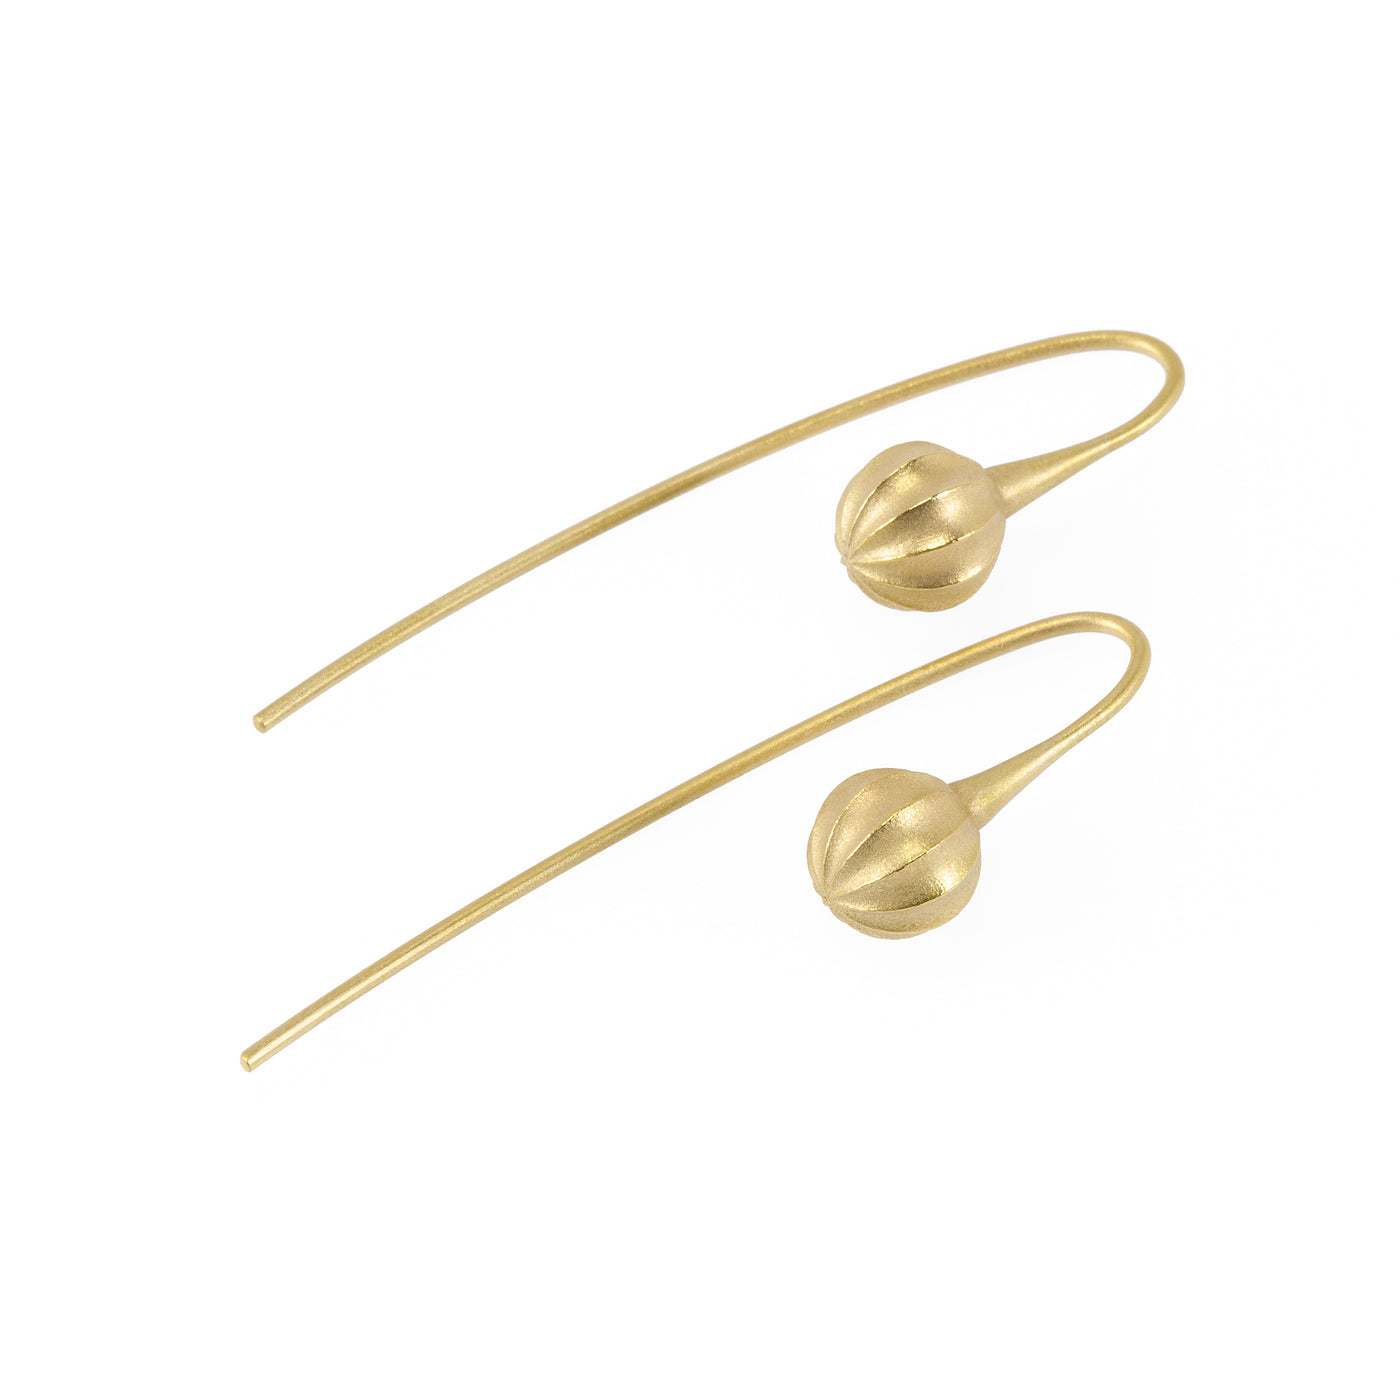 Sustainable gold earrings. These ethical Seed Earrings are handmade in Cape Town in recycled gold from e-waste.